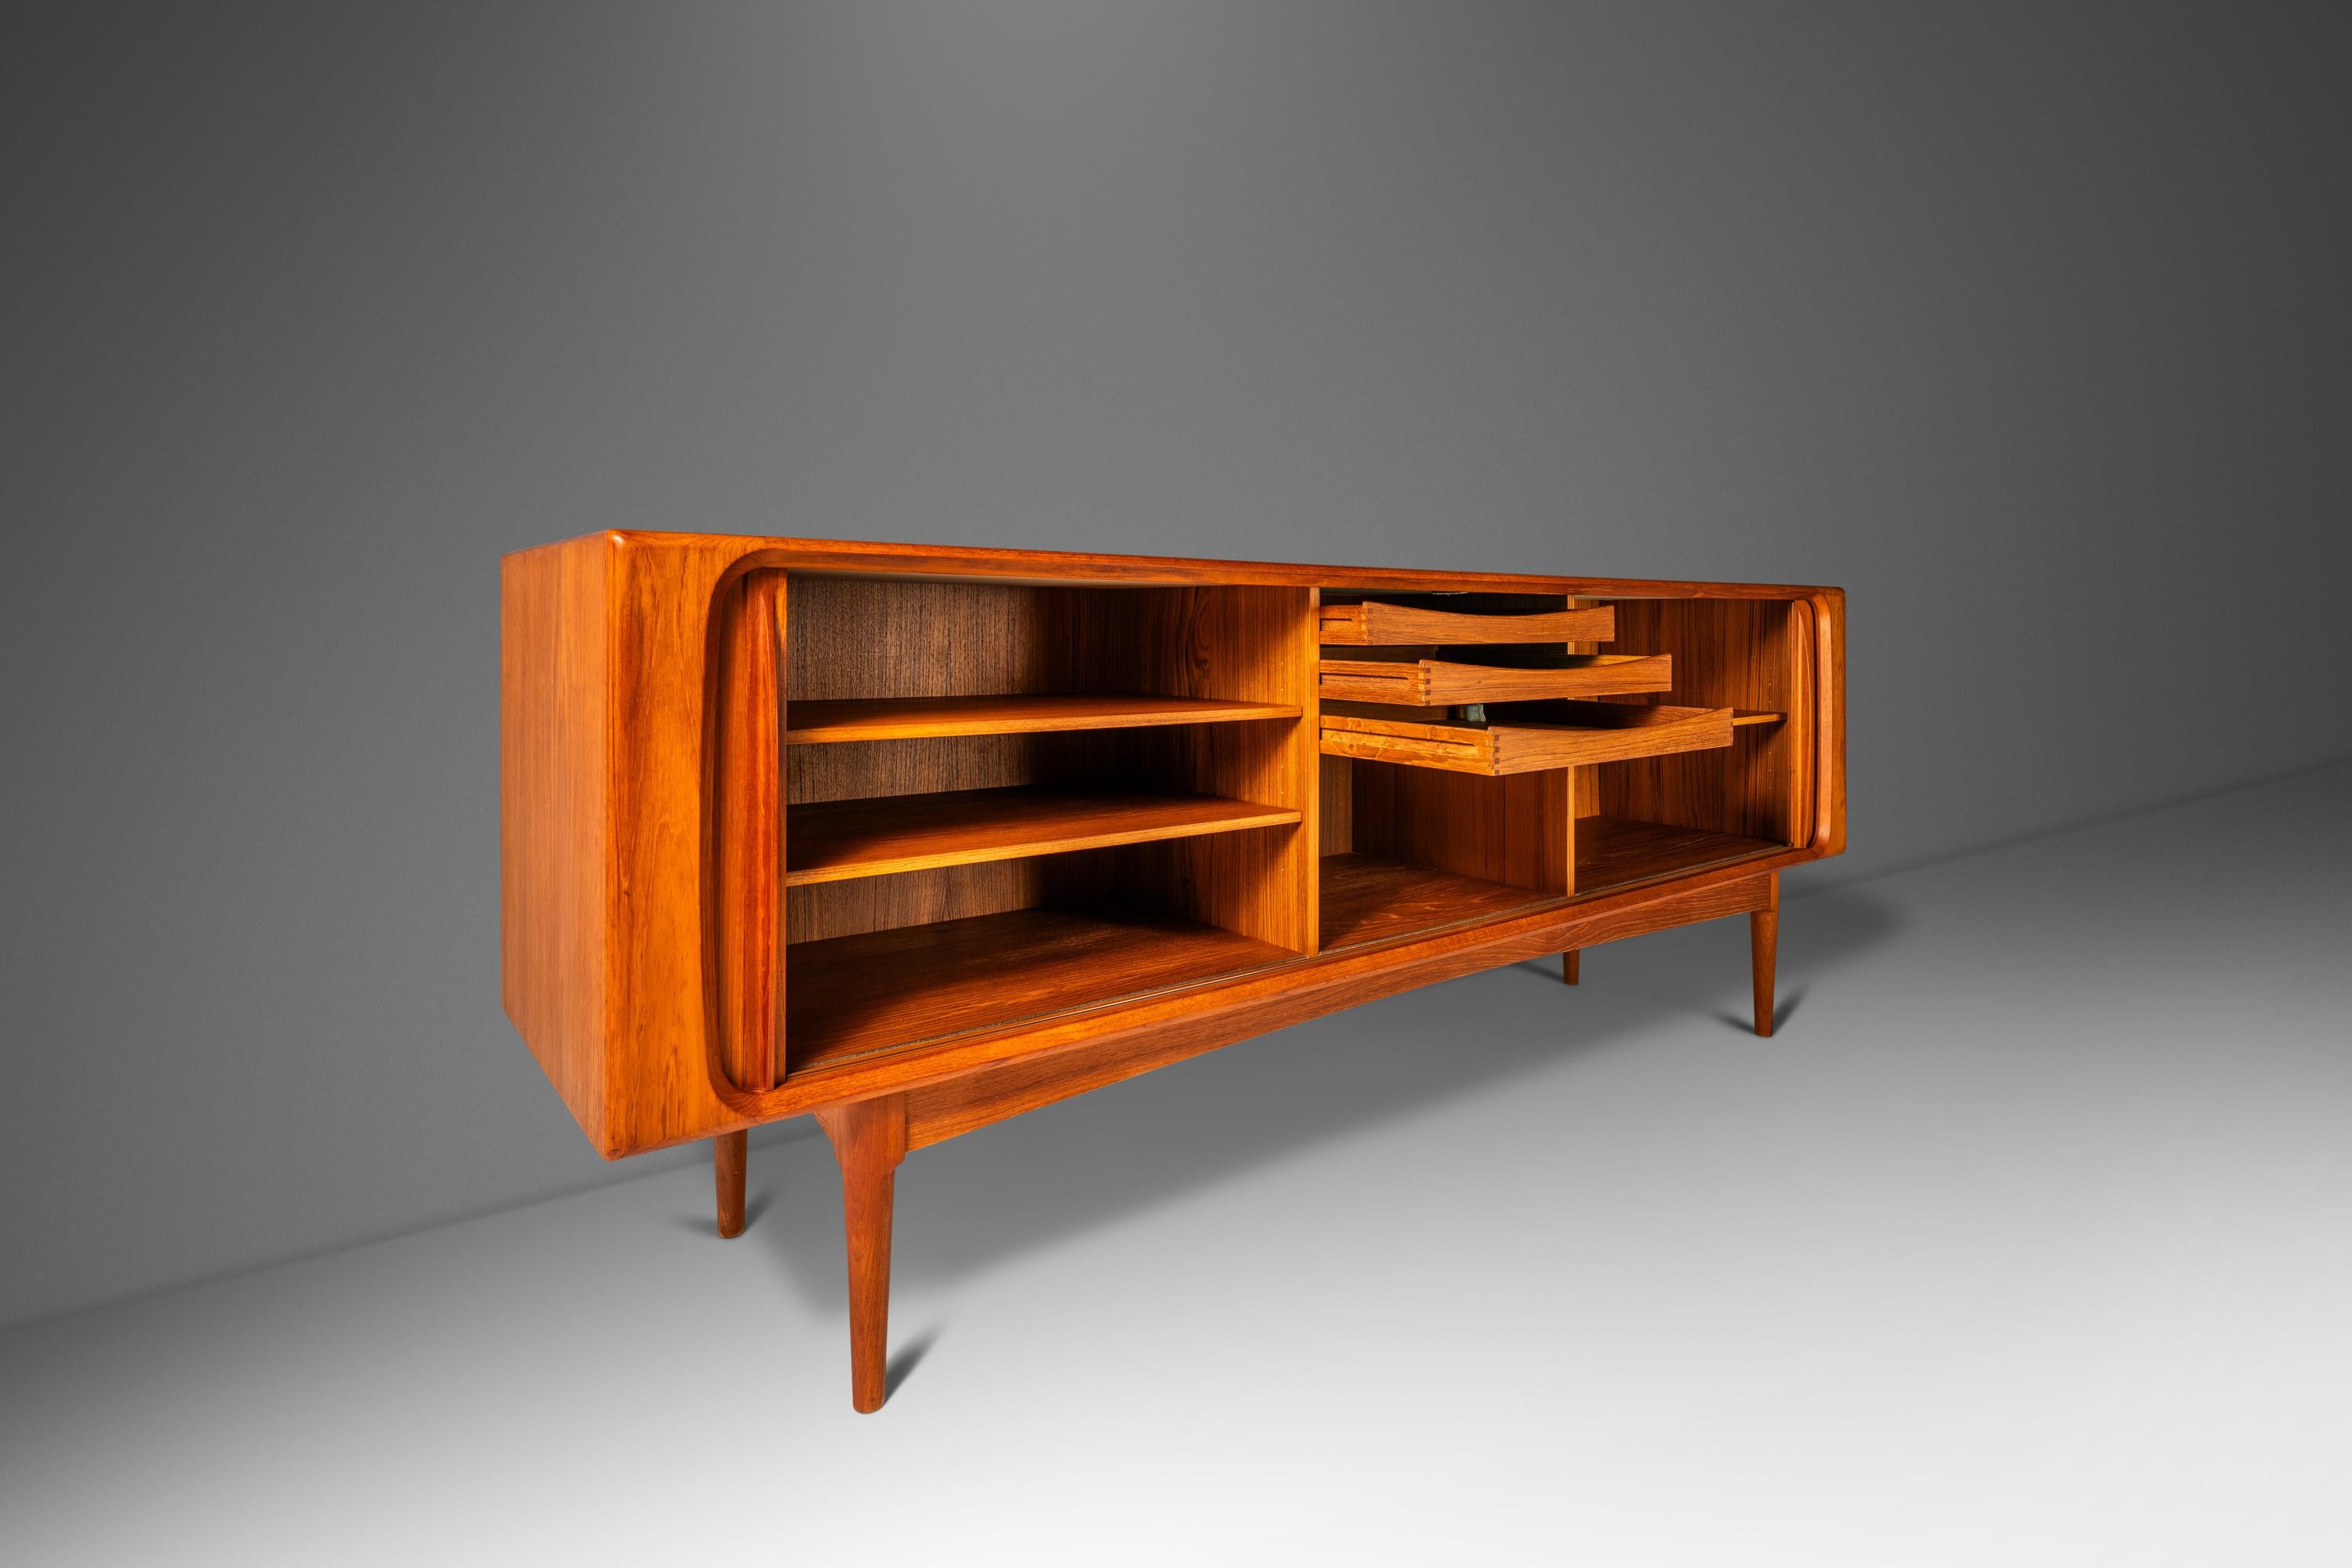 Audacious in scope, design and materials used this extraordinary Danish-made credenza is as functional as it is visually arresting. Constructed from a mix of solid and matchbook-veneered Burmese teak this striking sideboard is ideal for collectors